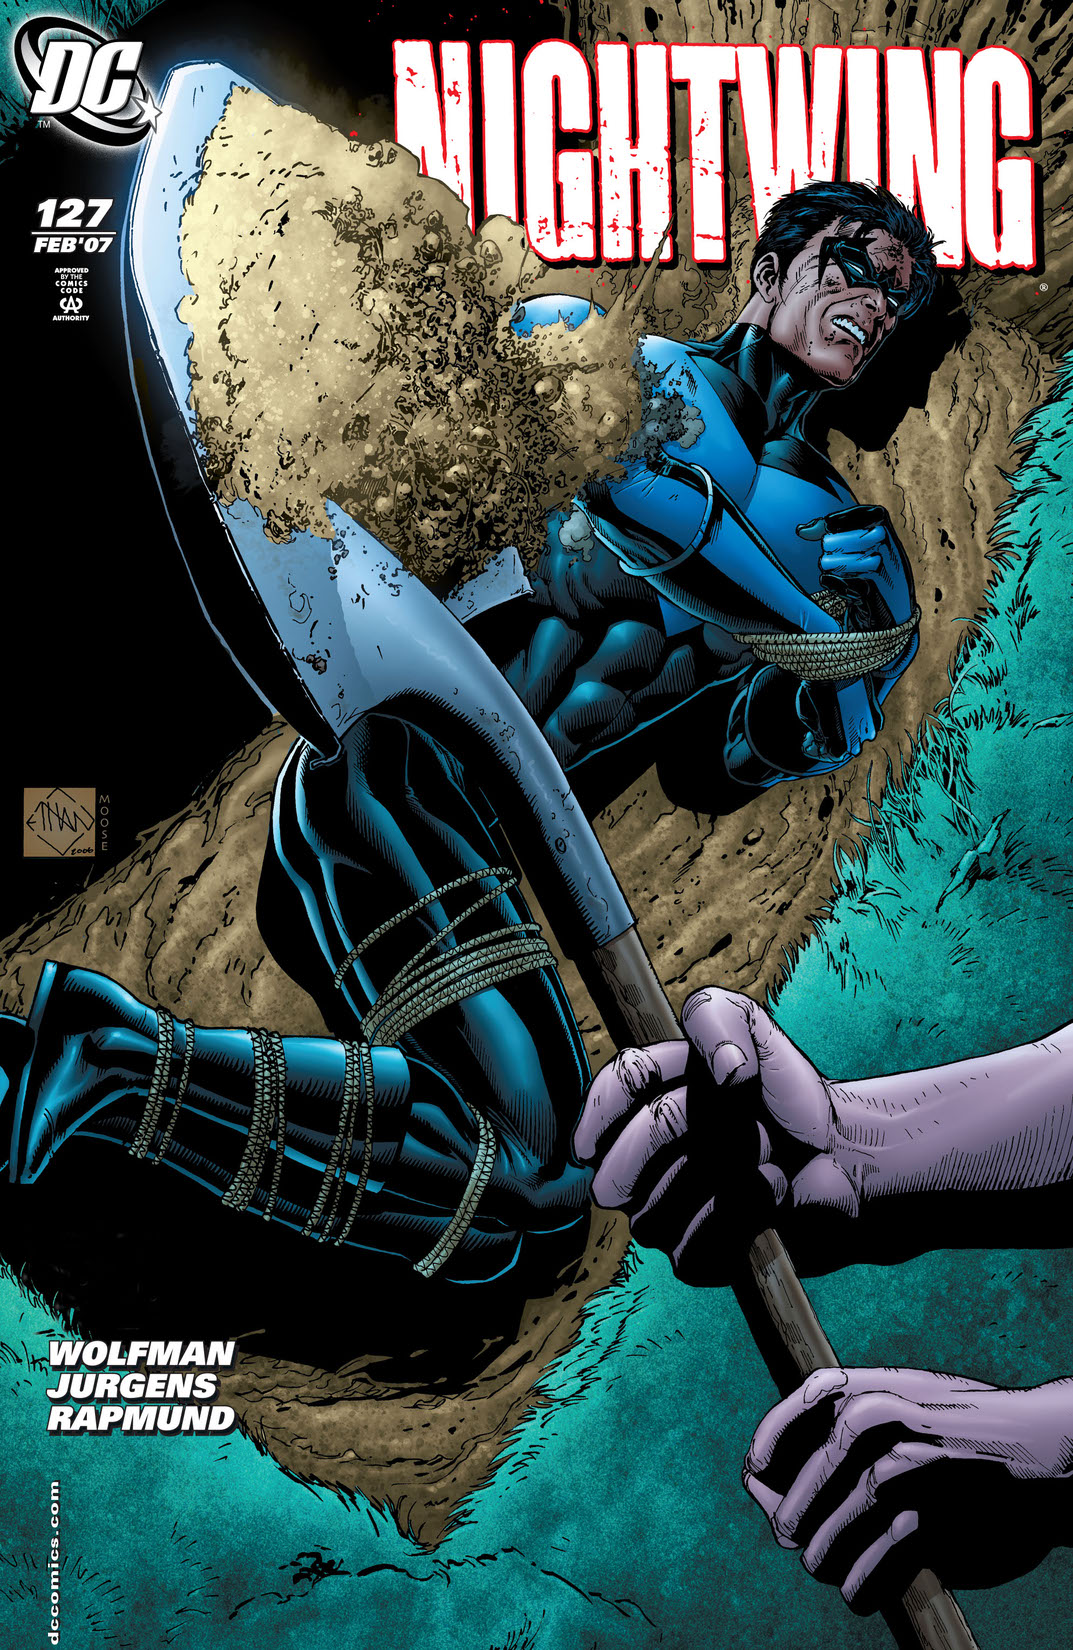 Nightwing (1996-) #127 preview images